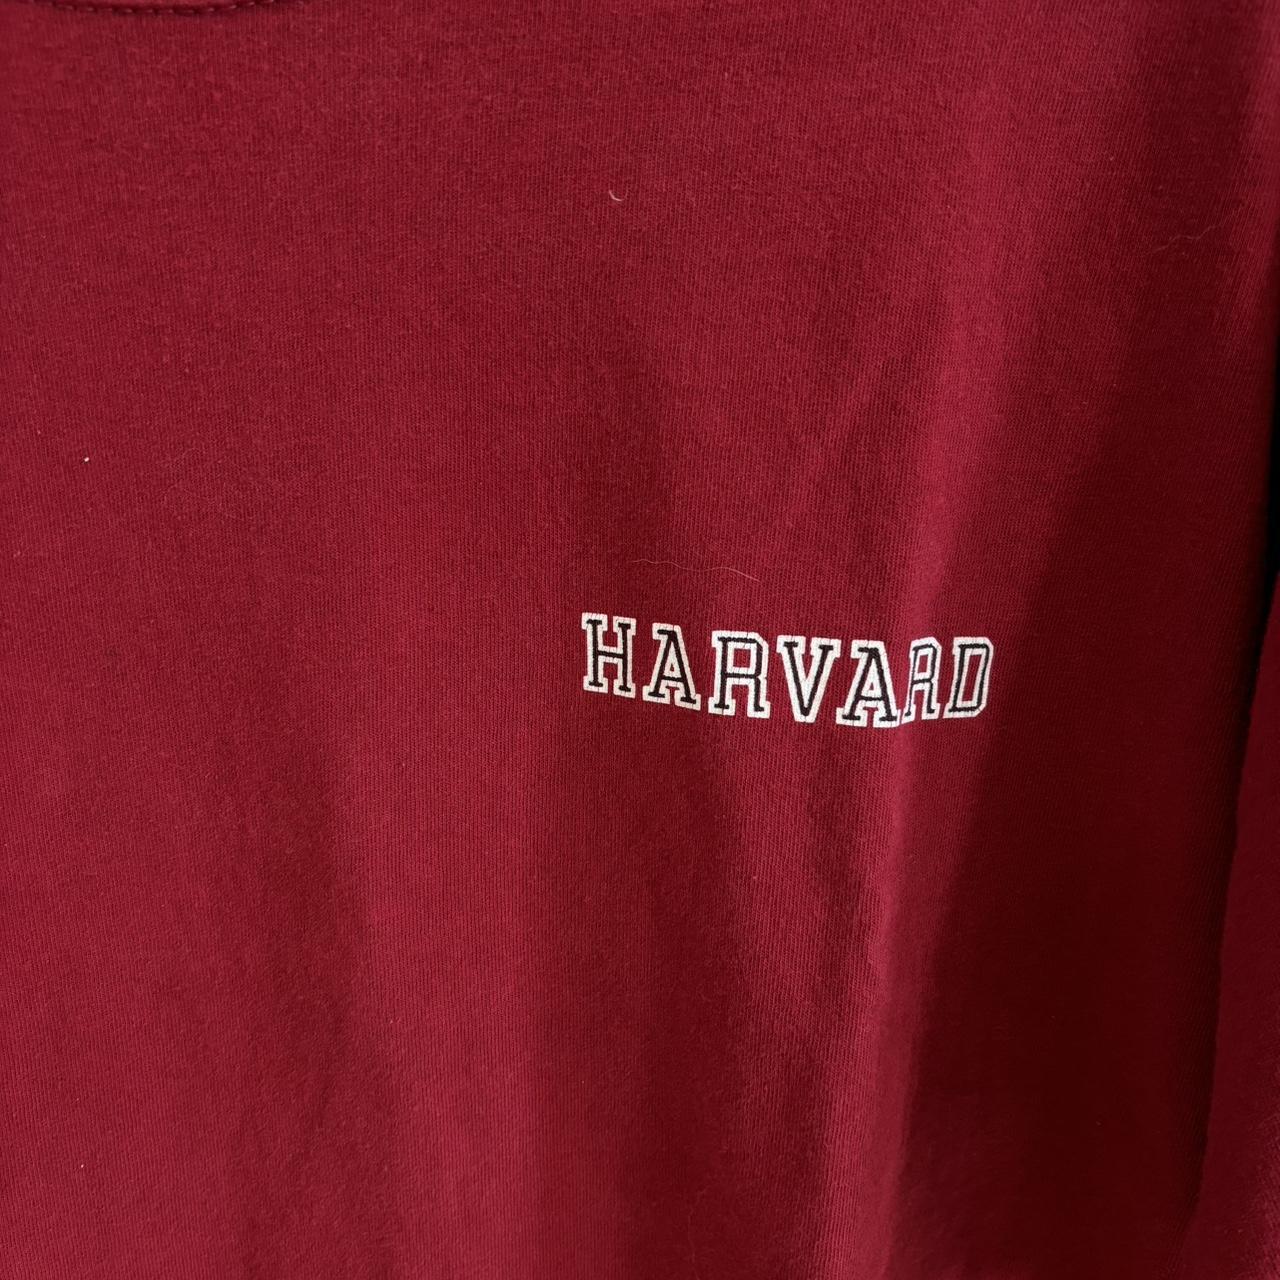 Vintage Russell Harvard Tee Made in USA Size:... - Depop